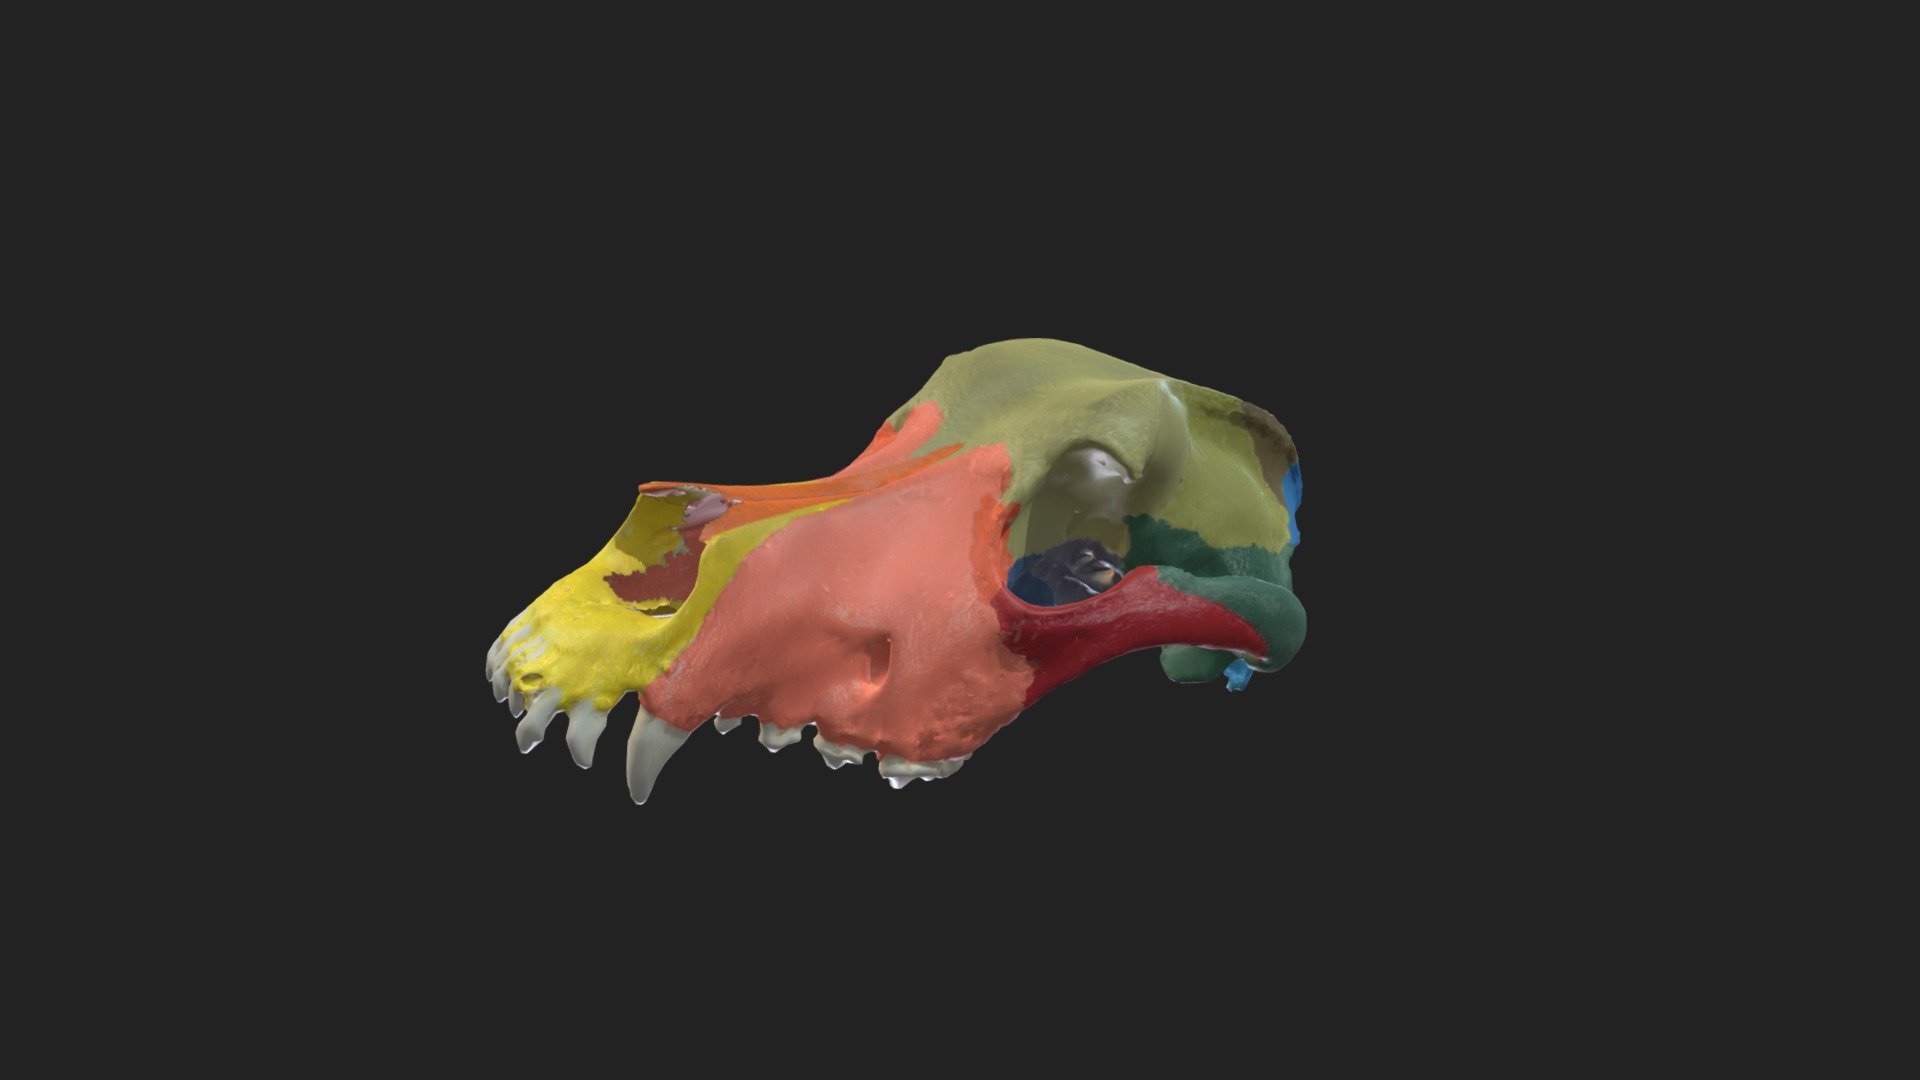 painted upper skull of a dog 

size of the specimen: 254.7 x 136 x 107 mm

3D scanning performed with the structured light scanner “Artec Spider”

caption:
yellow: incisive bone (Os incisivum) 
orange: nasale bone (Os nasale)
pink: maxilla (Maxilla) 
dark orange: lacrimal bone (Os lacrimale) 
red: zygomatic bone (Os zygomaticum) 
pale green: frontal bone (Os frontale) 
maygreen: parietal bone (Os parietale) 
olive green: interparietal bone (Os interparietale) 
dark green: temporal bone (Os temporale) 
dark blue: palatine bone (Os palatinum) 
black: pterygoid bone (Os pterygoideum)
white: vomer (Vomer)
purple: presphenoid (Os praesphenoidale)
dark purple: basisphenoid (Os basisphenoidale) 
pale blue: occipital bone (Os occipitale) 
royal blue: Squama occipitalis - painted upper skull of dog - 3D model by vetanatMunich 3d model